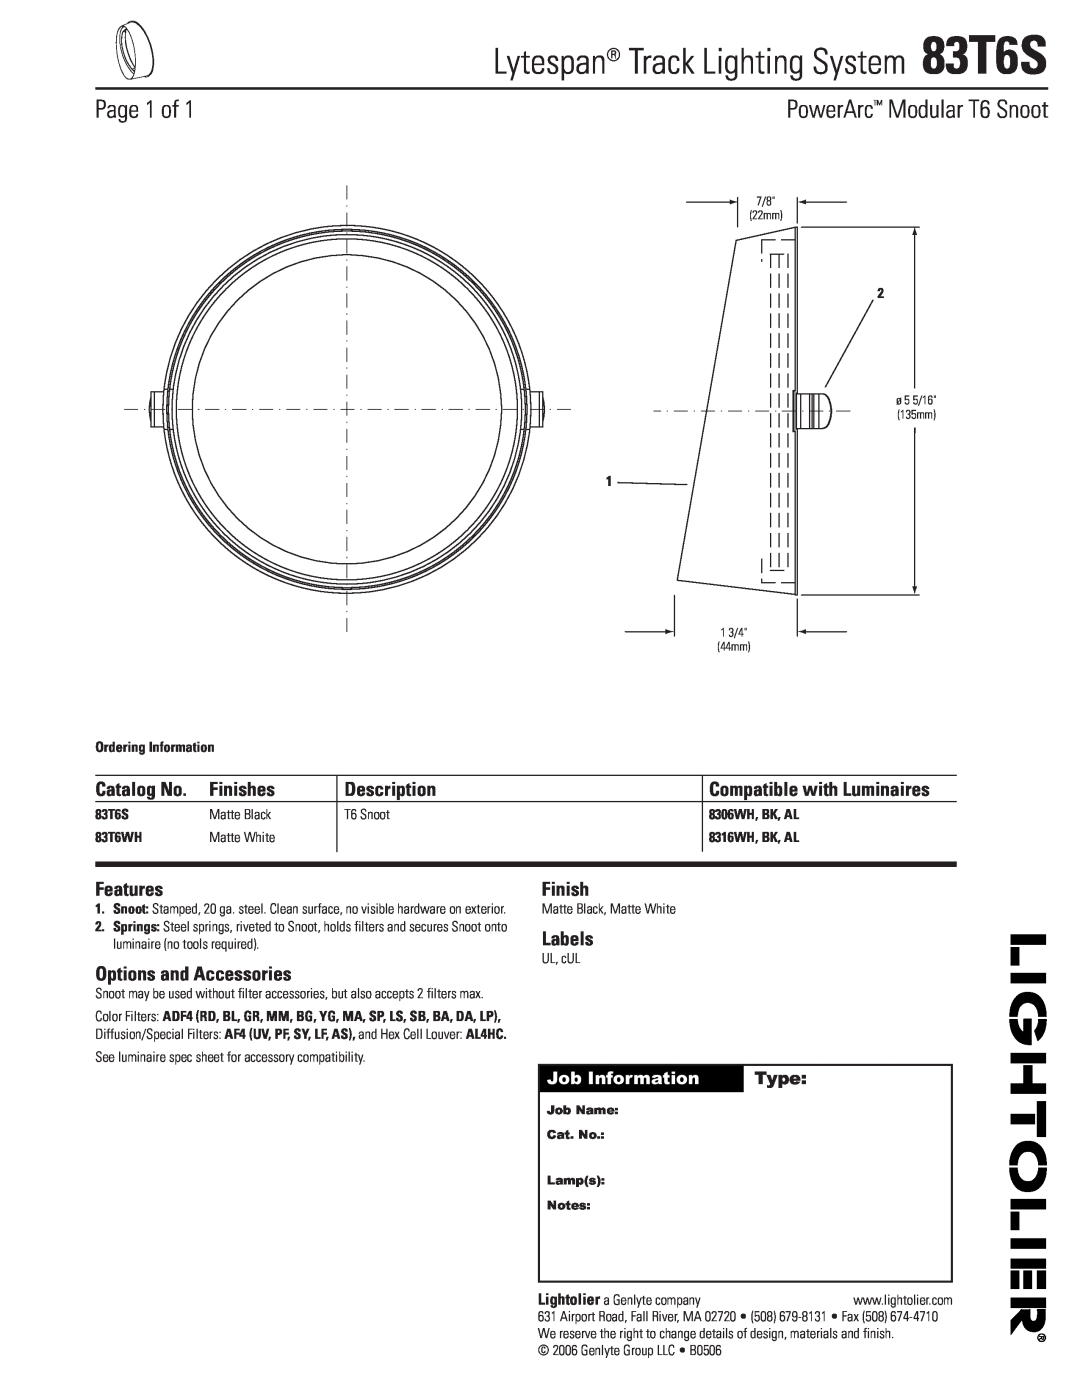 Lightolier manual Lytespan Track Lighting System 83T6S, Page 1 of, PowerArc Modular T6 Snoot, Catalog No, Finishes 